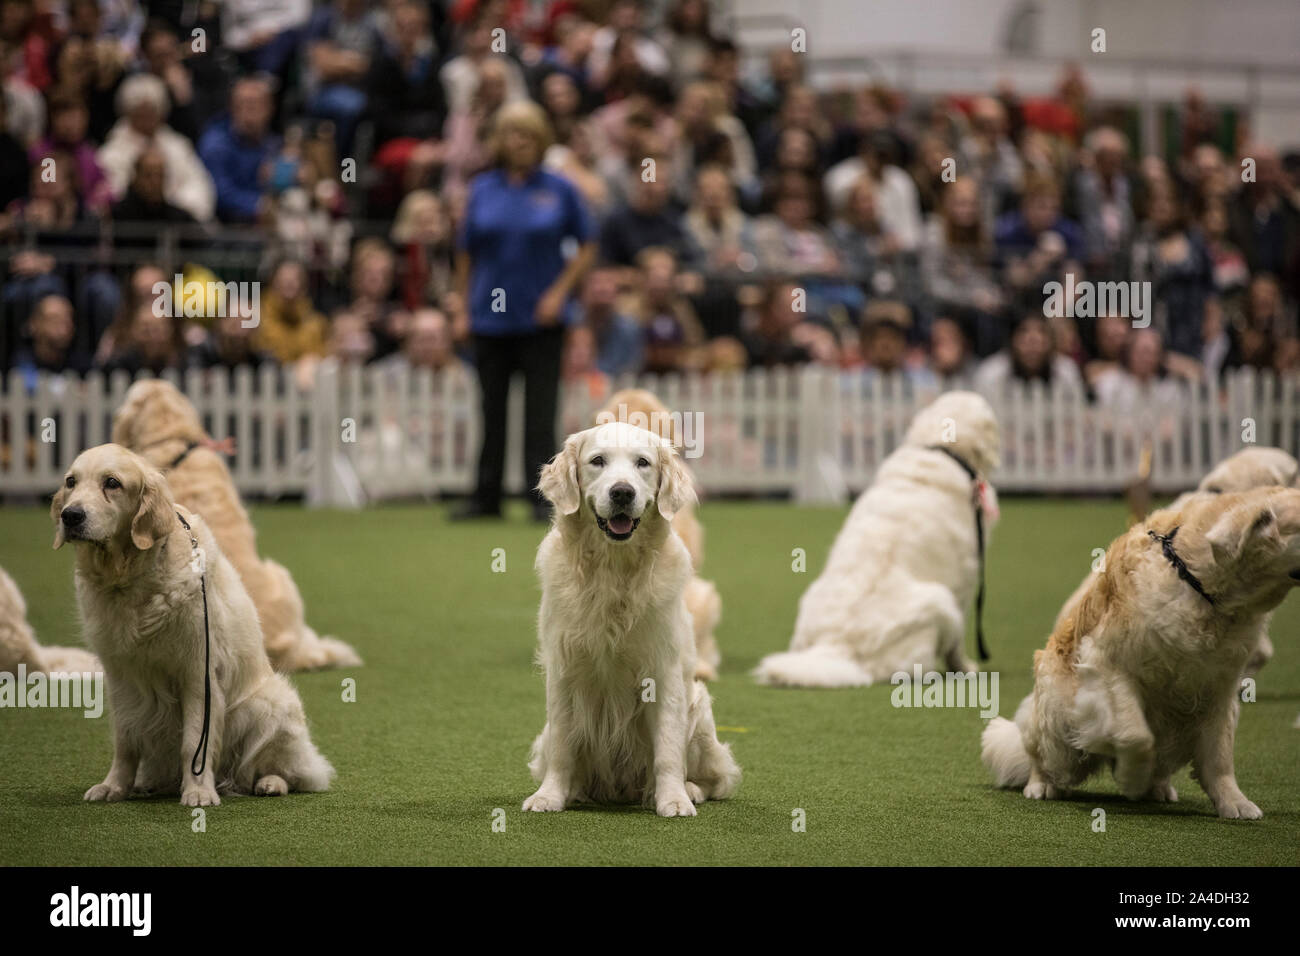 The Kennel Club Discovery Dogs exhibition at Excel London, UK Picture shows Southern Golden Retriever Display Team. Stock Photo